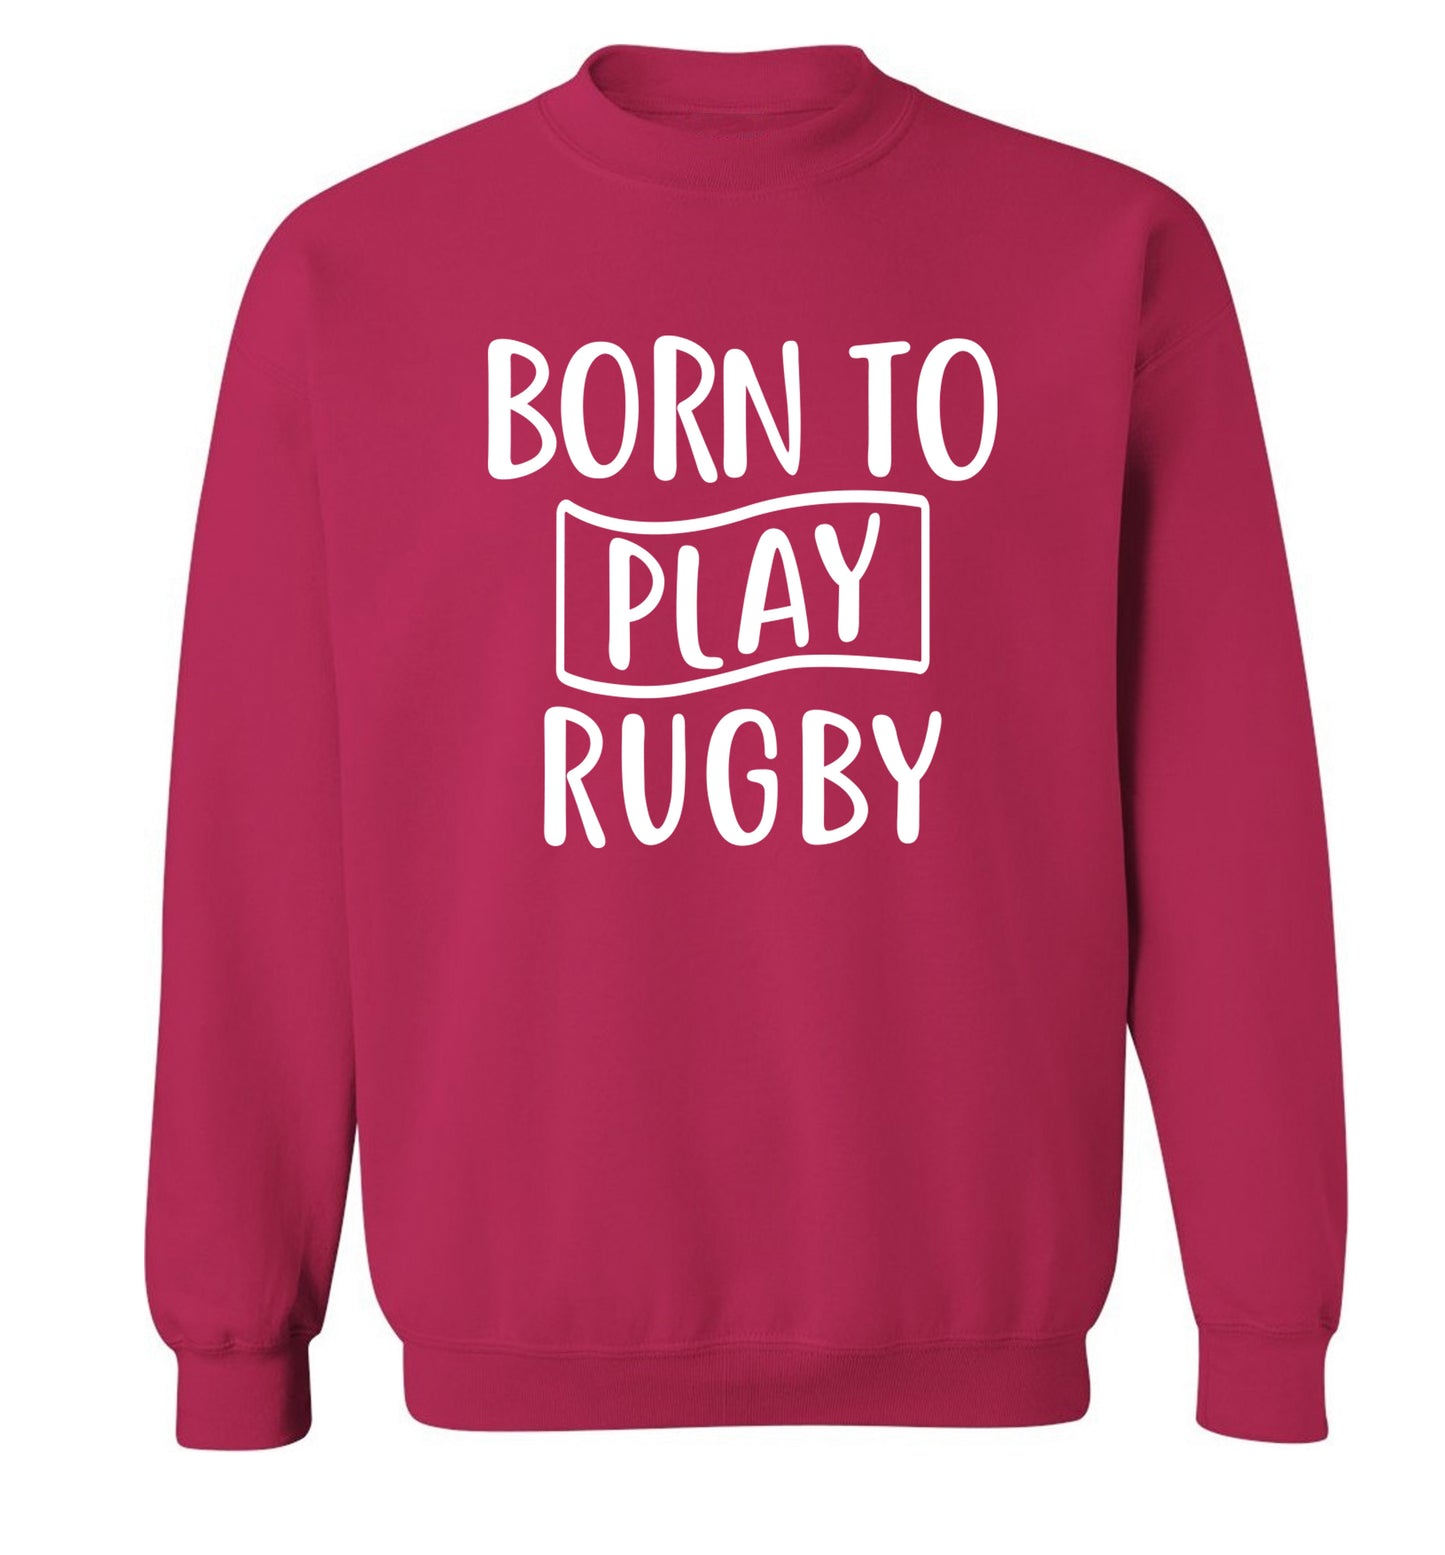 Born to play rugby Adult's unisex pink Sweater 2XL